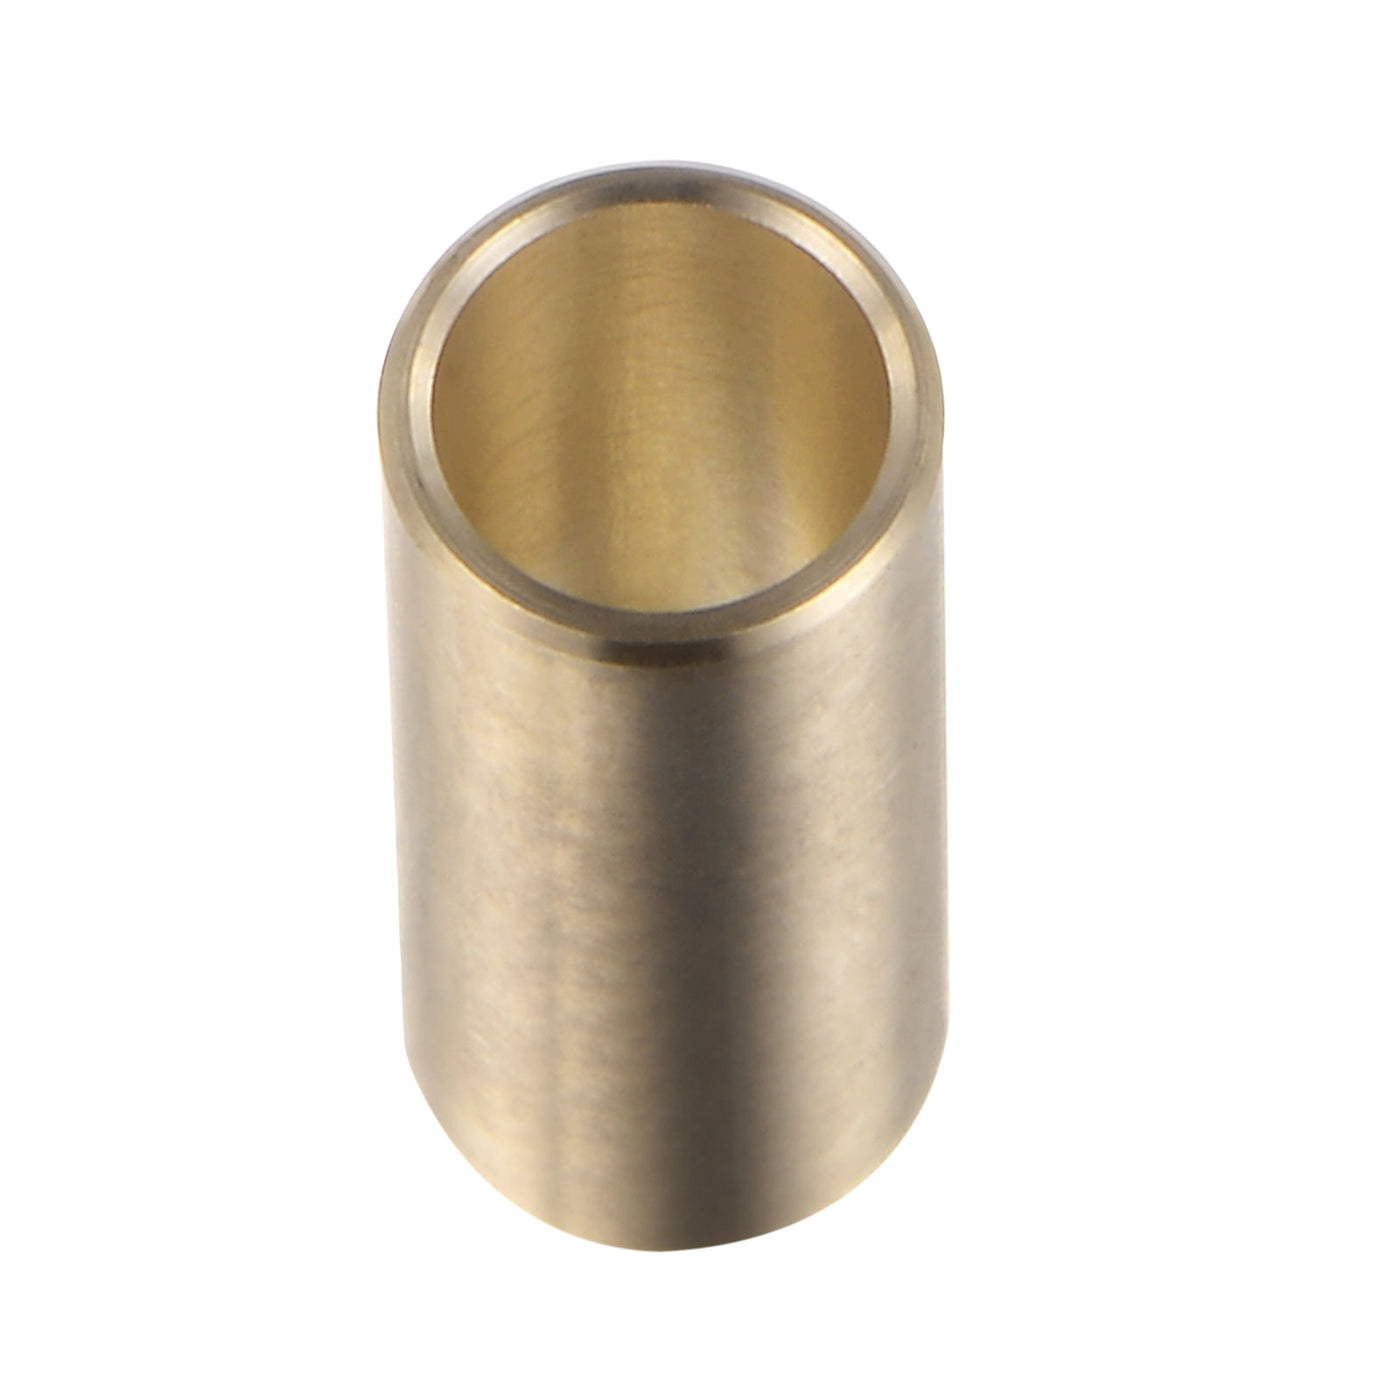 uxcell Uxcell 3pcs Sleeve Bearings 1/4" x 5/16" x 3/4" Wrapped Oilless Bushings Cast Brass